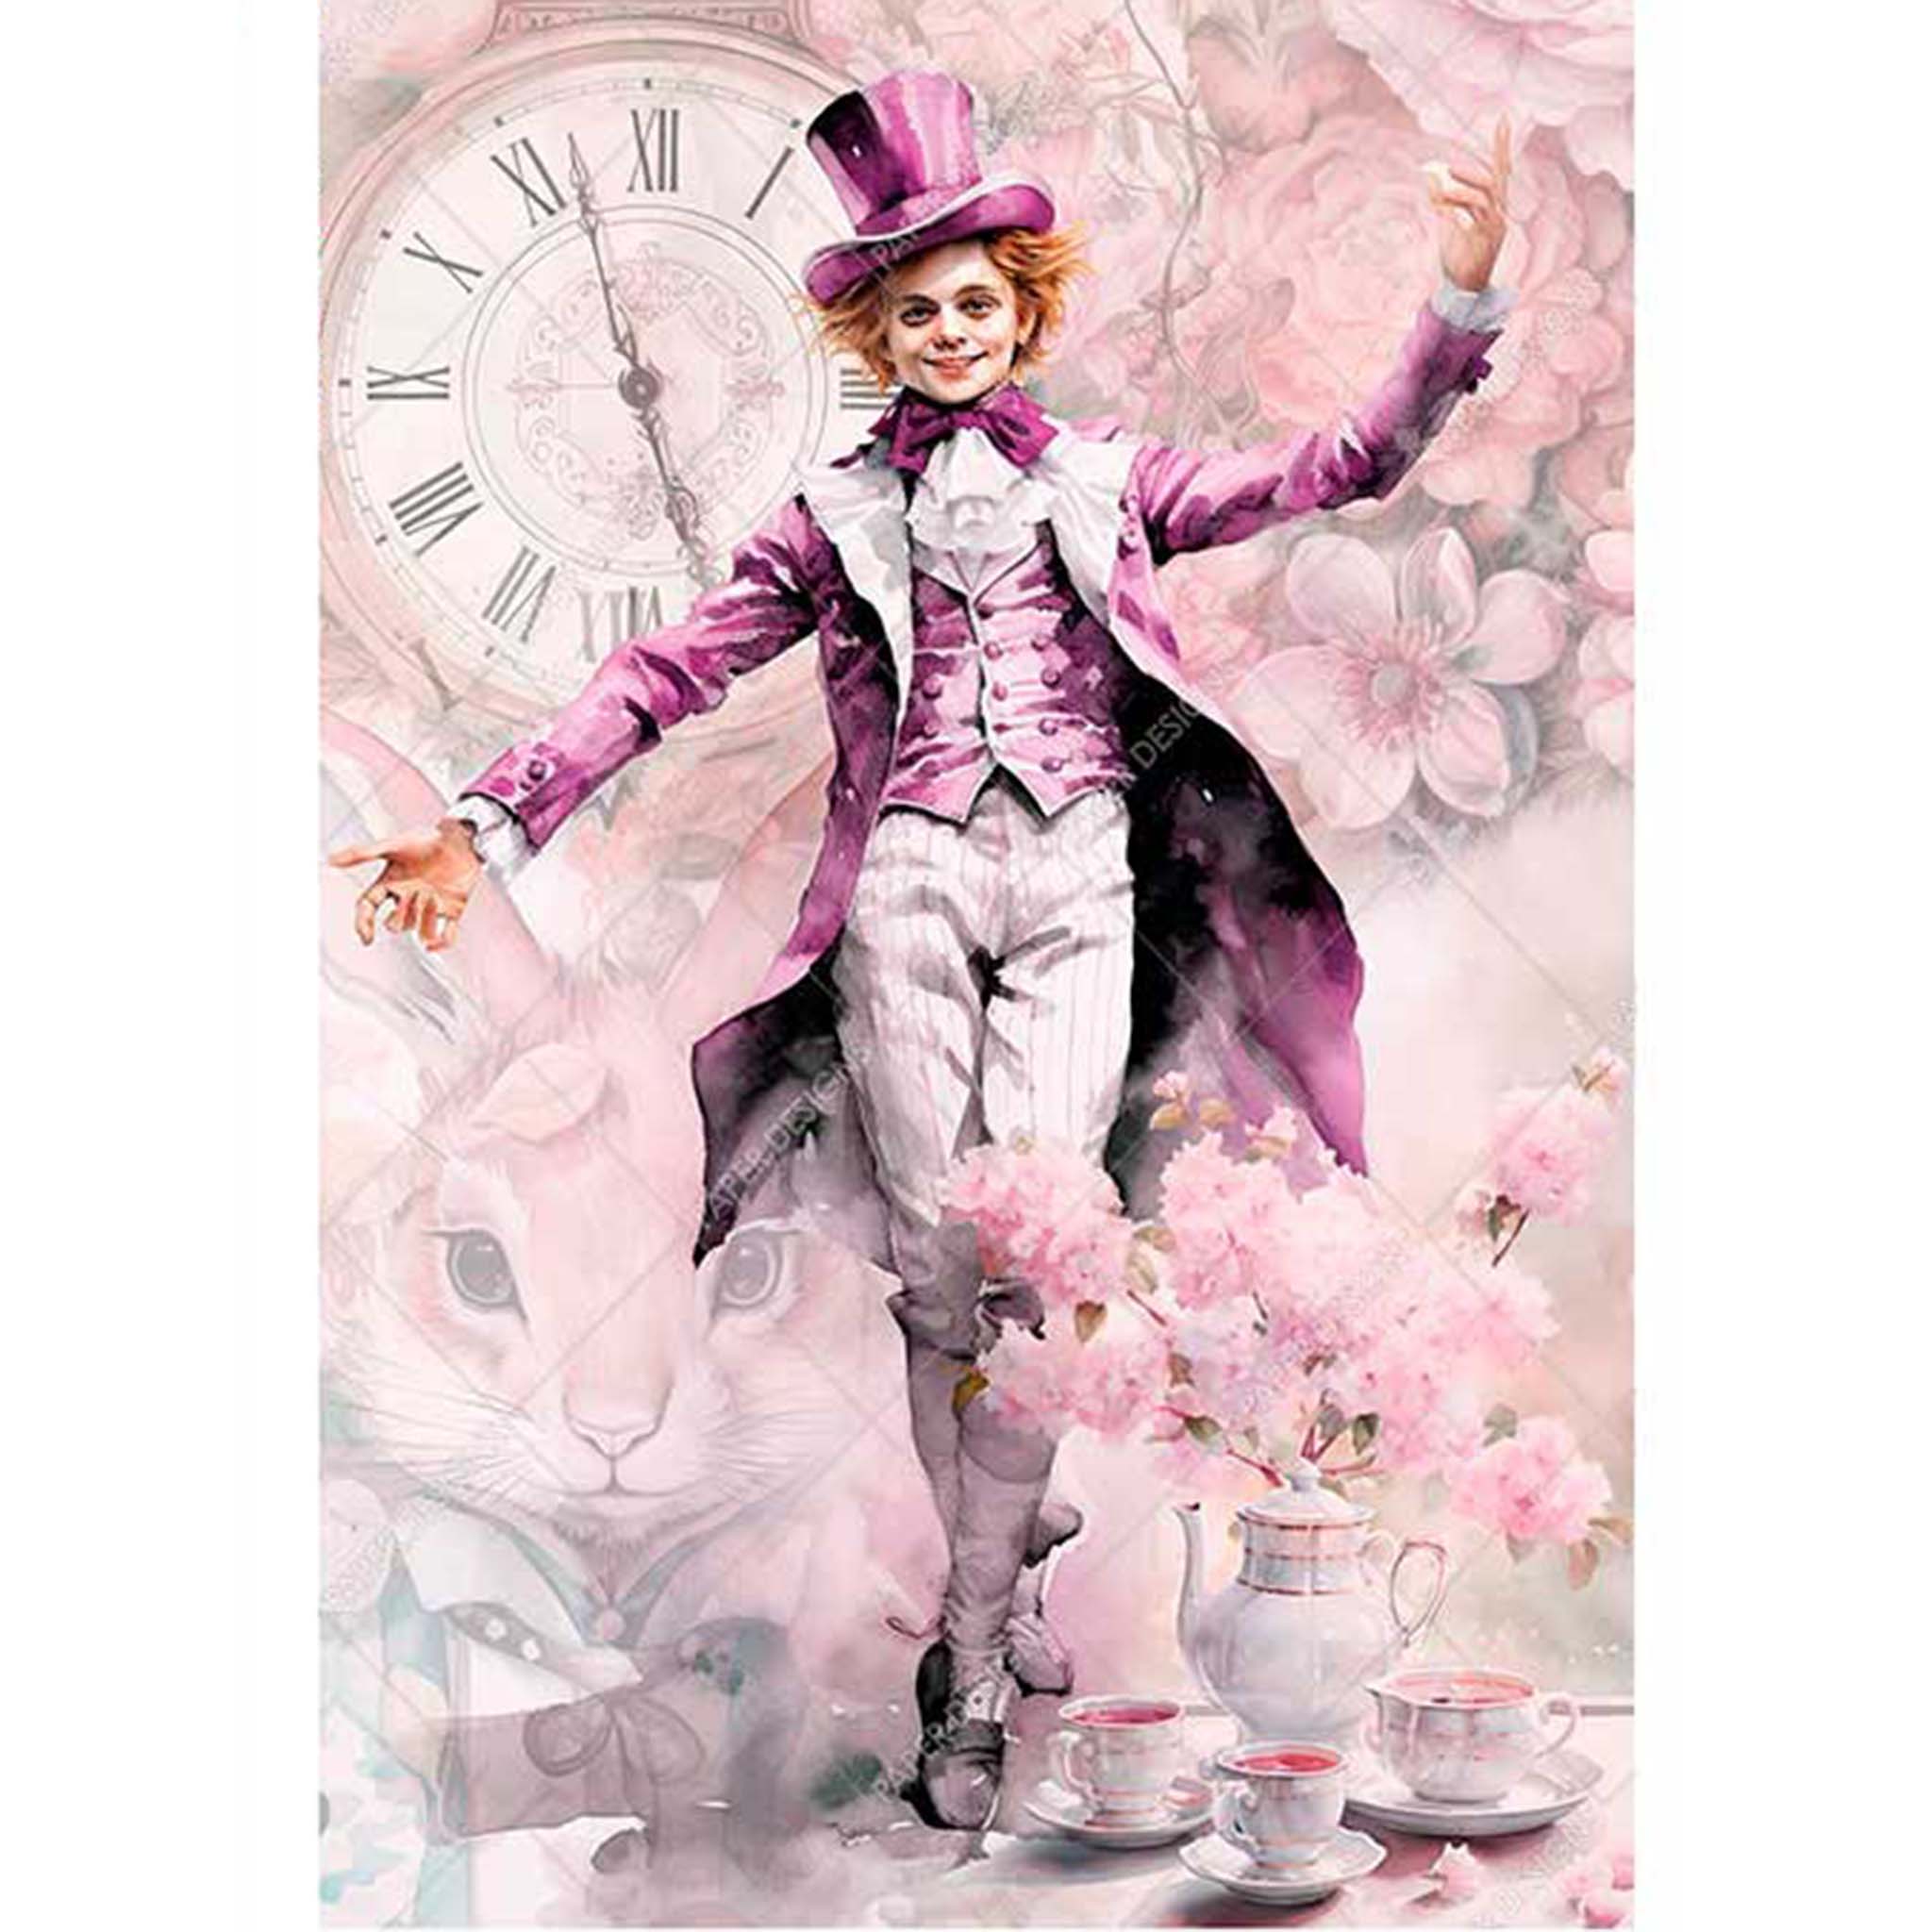 A0 rice paper design featuring The Mad Hatter and a tea set against a large clock face and rabit face in front of a pink floral background. White borders are on the sides.